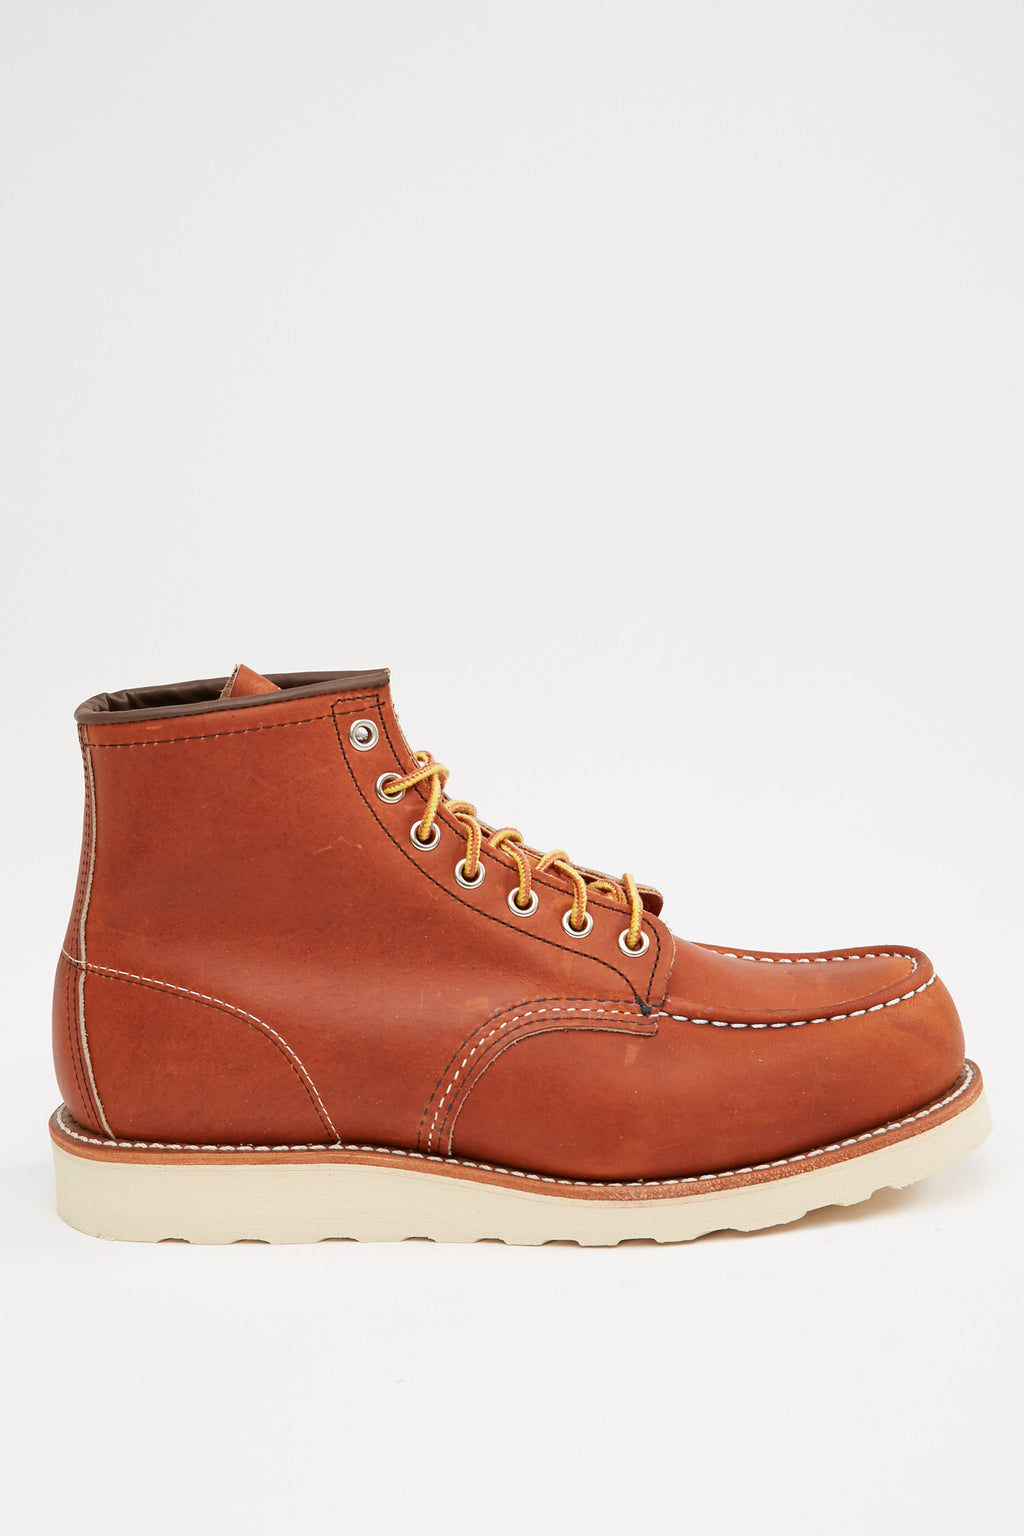 red wing boots 875